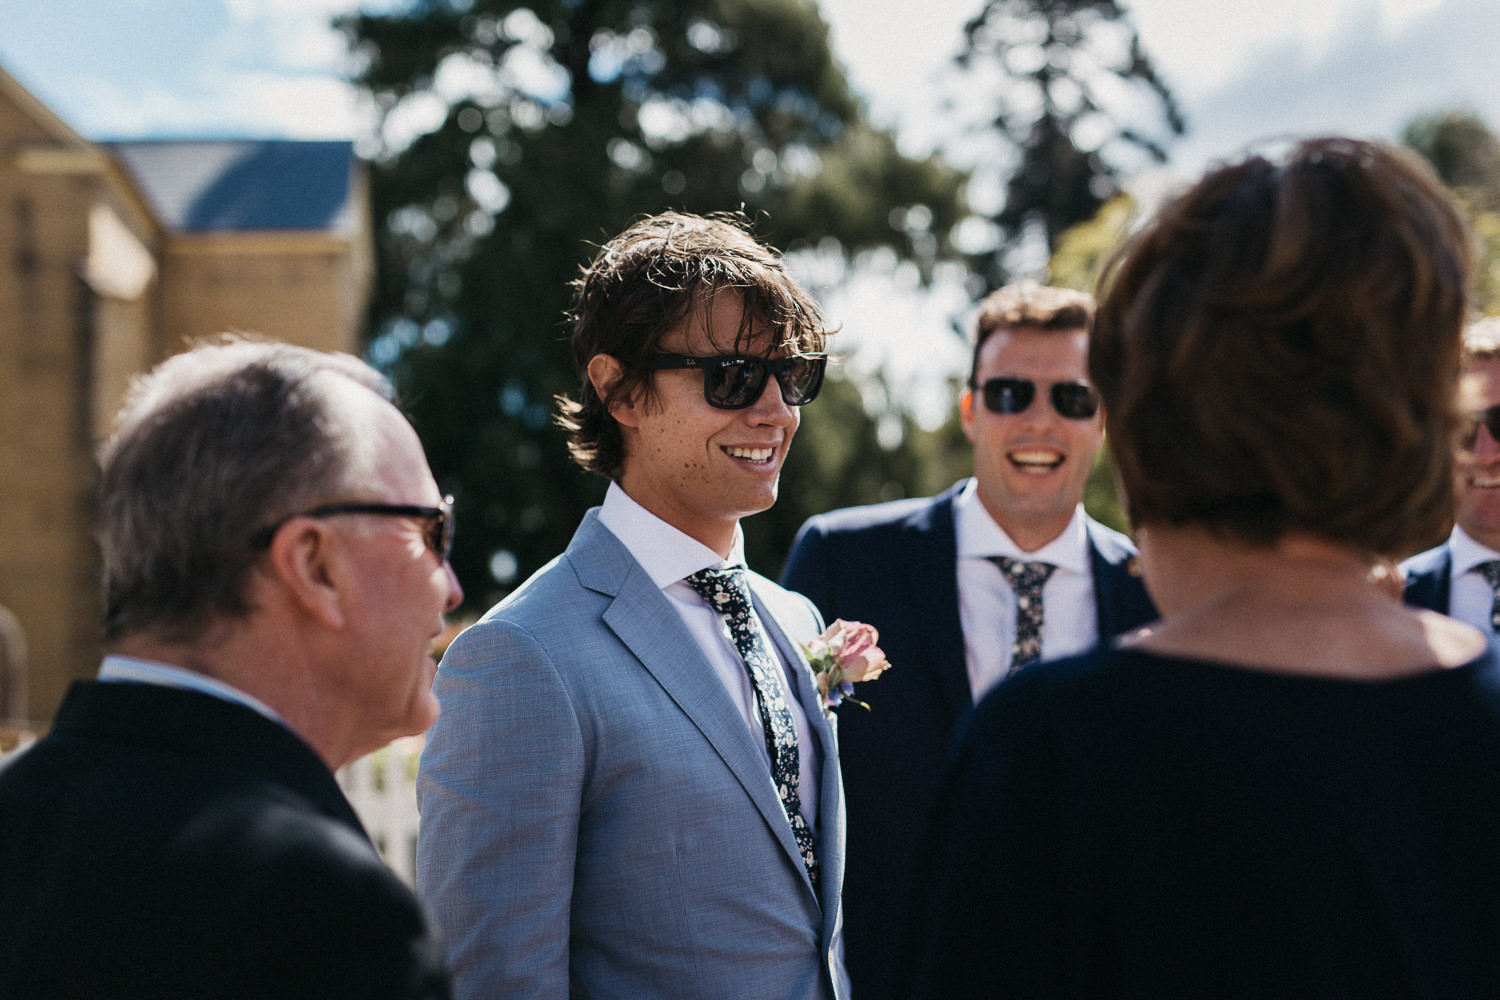 briars-country-lodge-wedding-bowral-nsw-miriam-andy-37